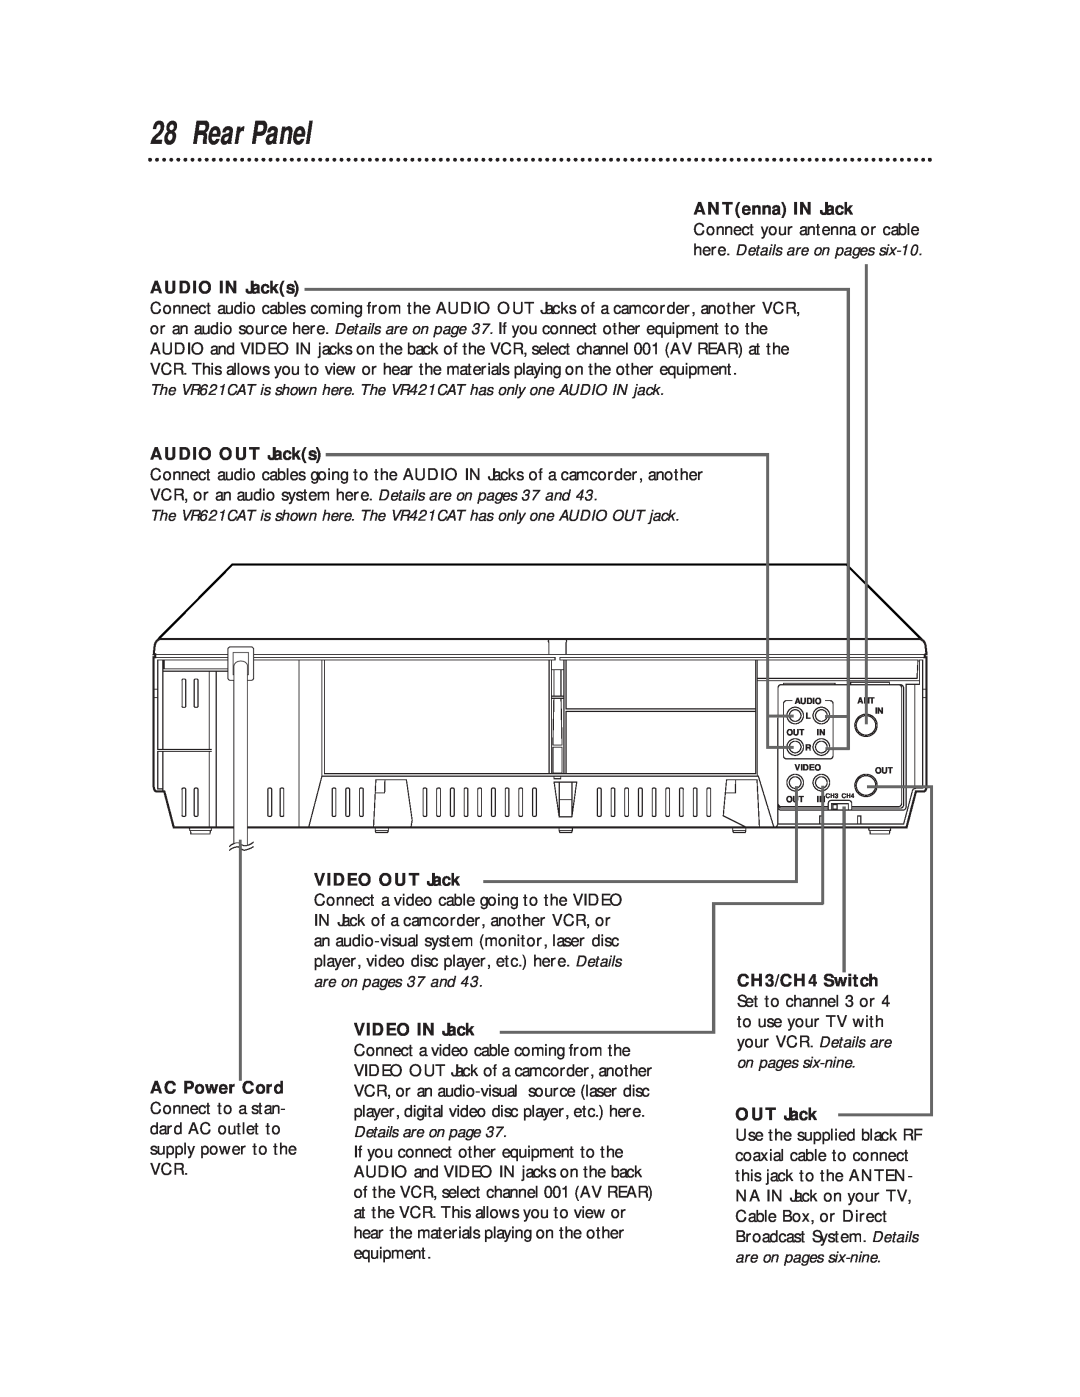 Philips manual Rear Panel, The VR621CAT is shown here. The VR421CAT has only one AUDIO IN jack, are on pages 37 and 